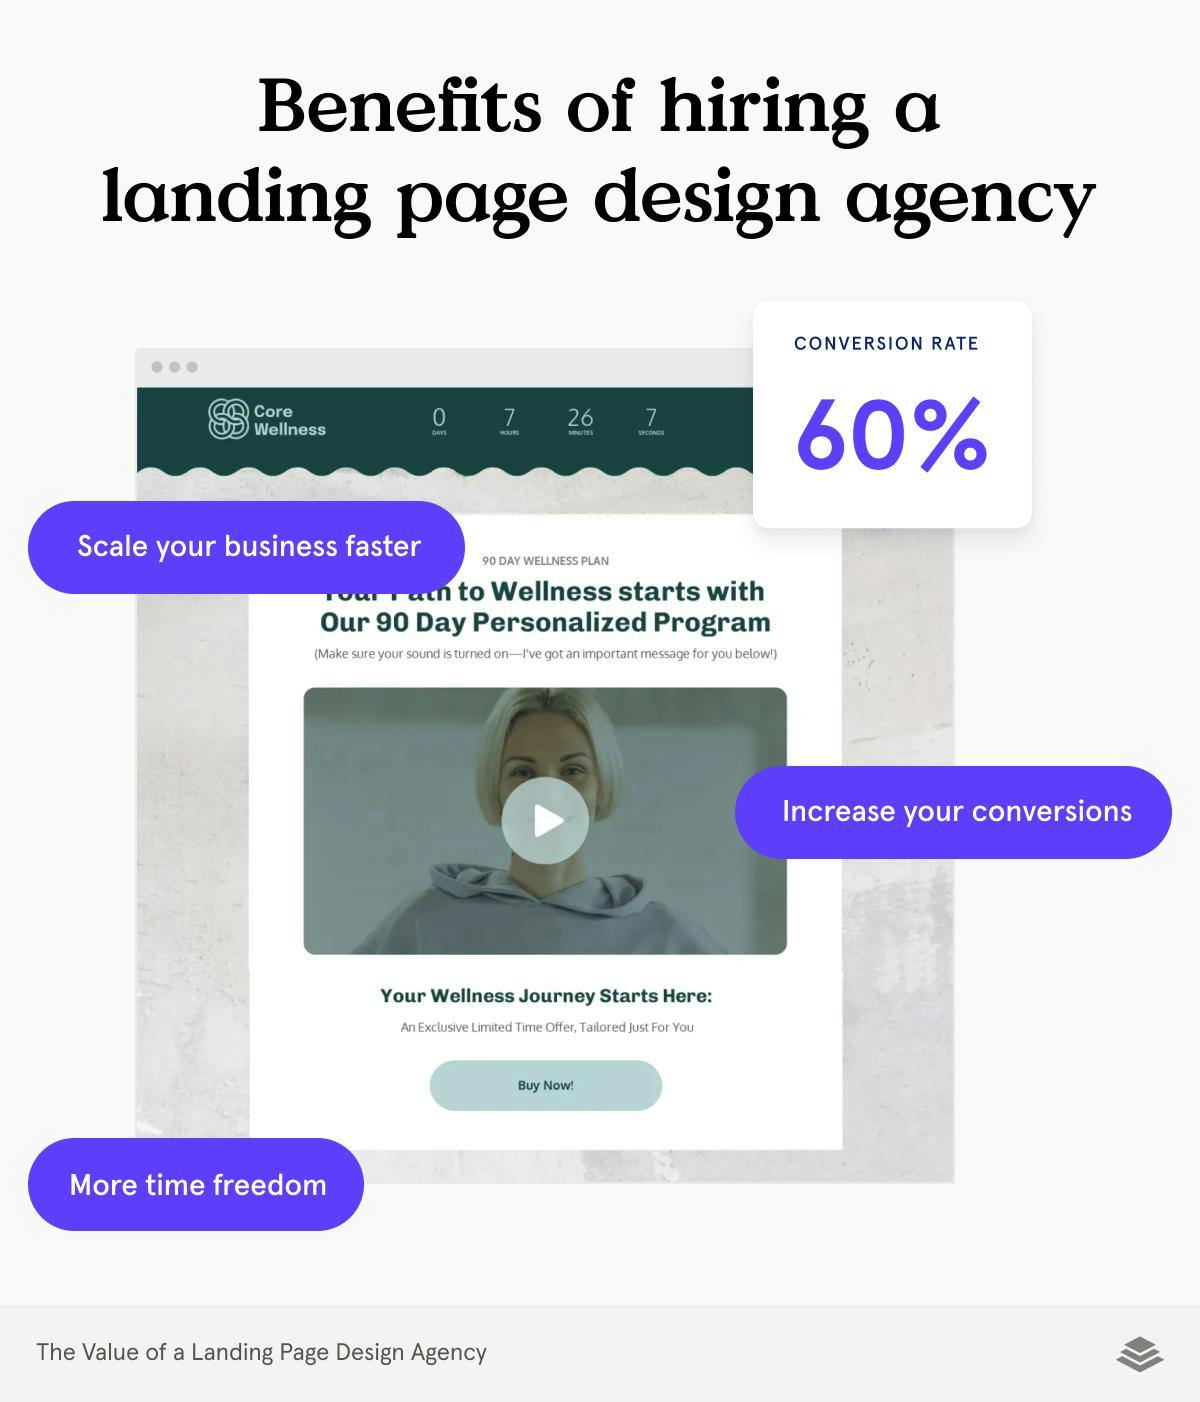 Benefits of hiring a landing page design agency